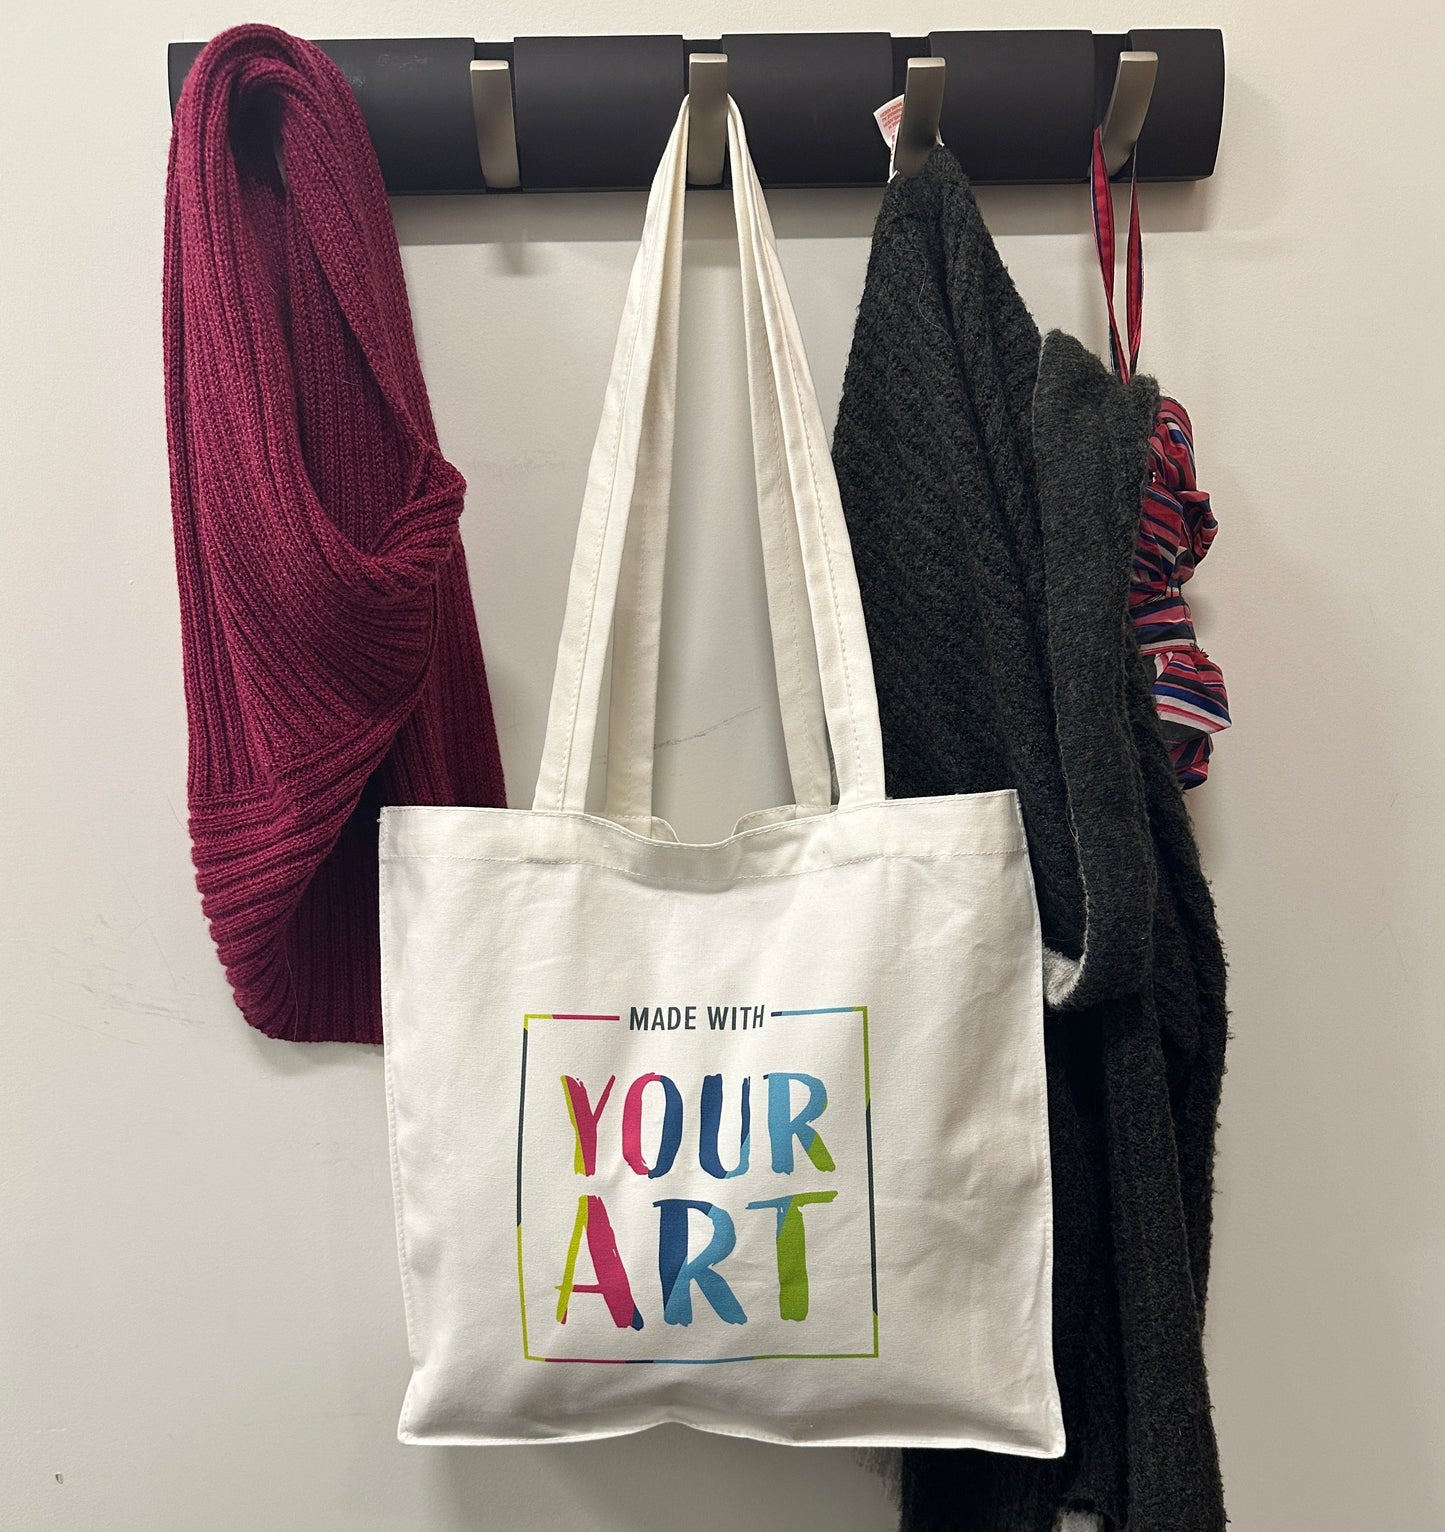 Tote bag hanging on coat rack with logo Made With Your Art on it